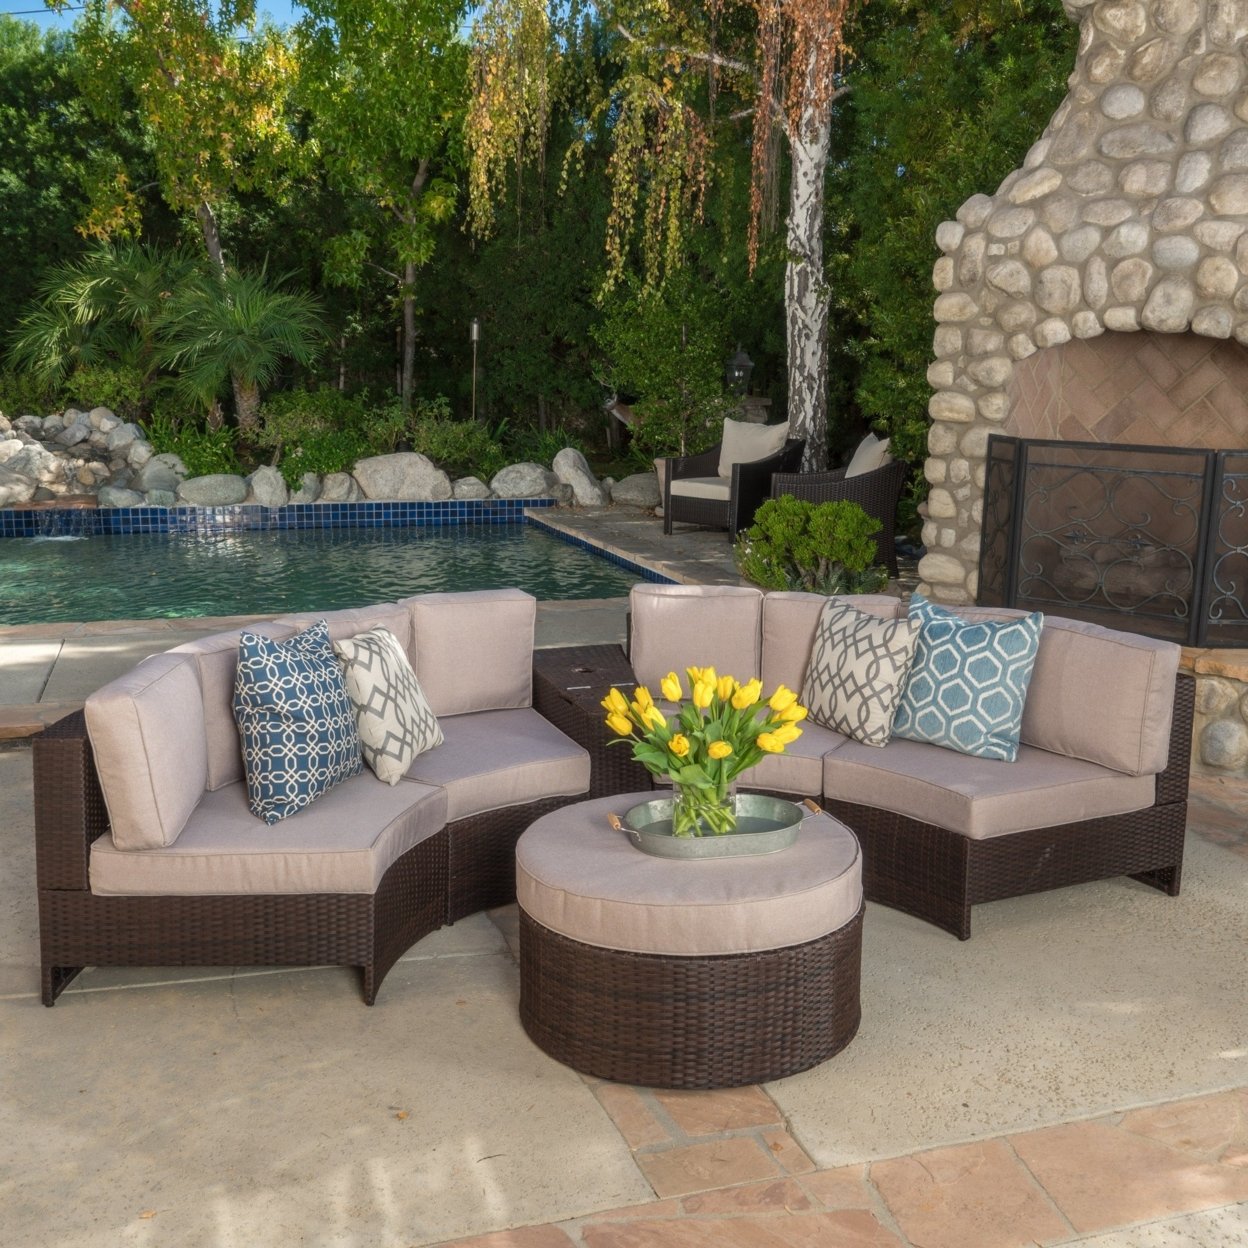 Riviera 6pc Outdoor Sectional Sofa Set With Storage Trunk - Beige